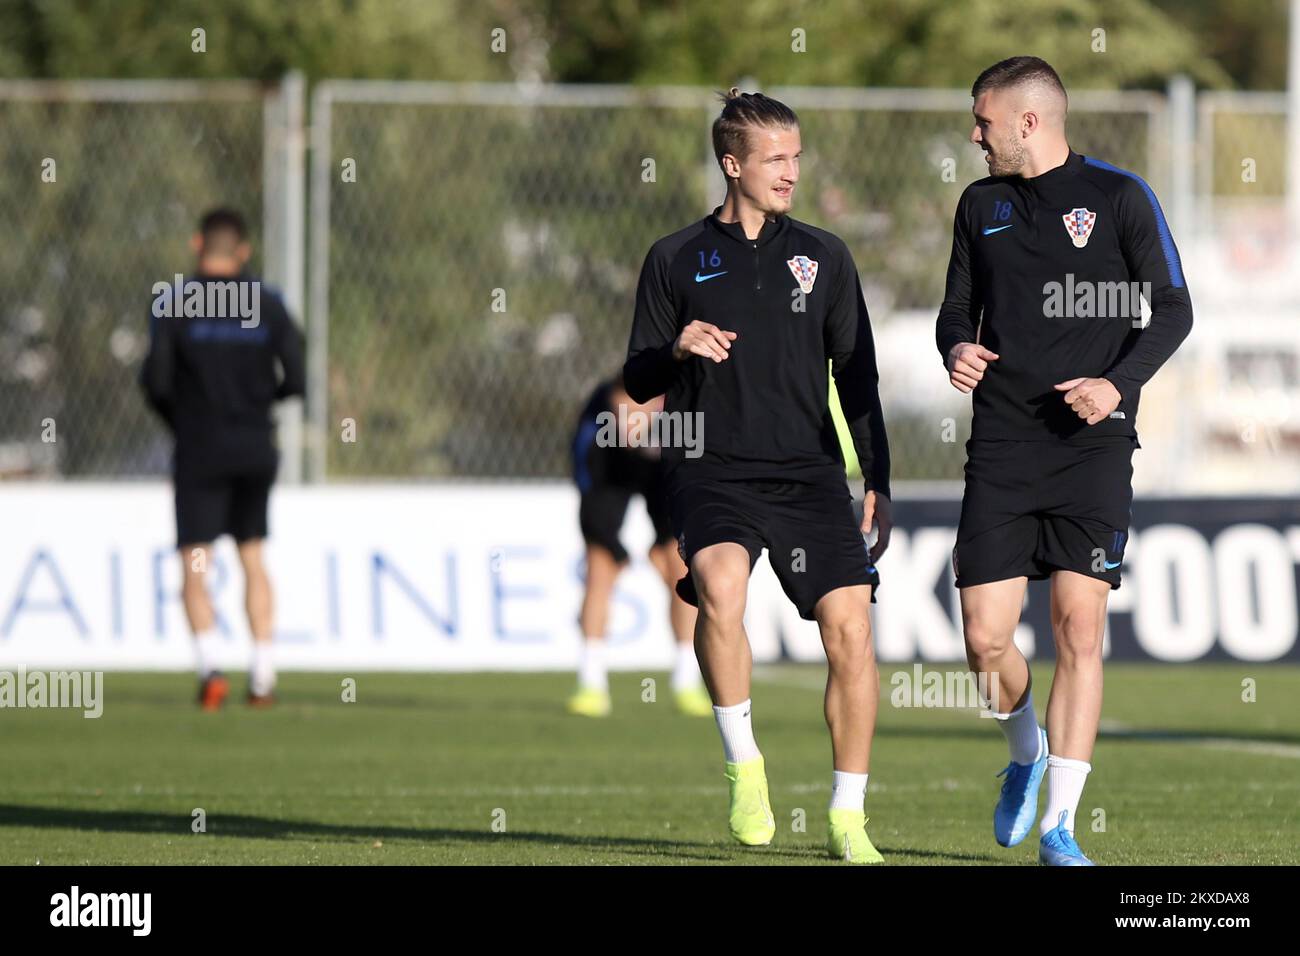 08.10.2019,Omis - Croatian national team hold second training session ahead of qualifying match for EP against Hungary. Tin Jedvaj, Ante Rebic. Croatia, Omis Photo: Ivo Cagalj/PIXSELL  Stock Photo